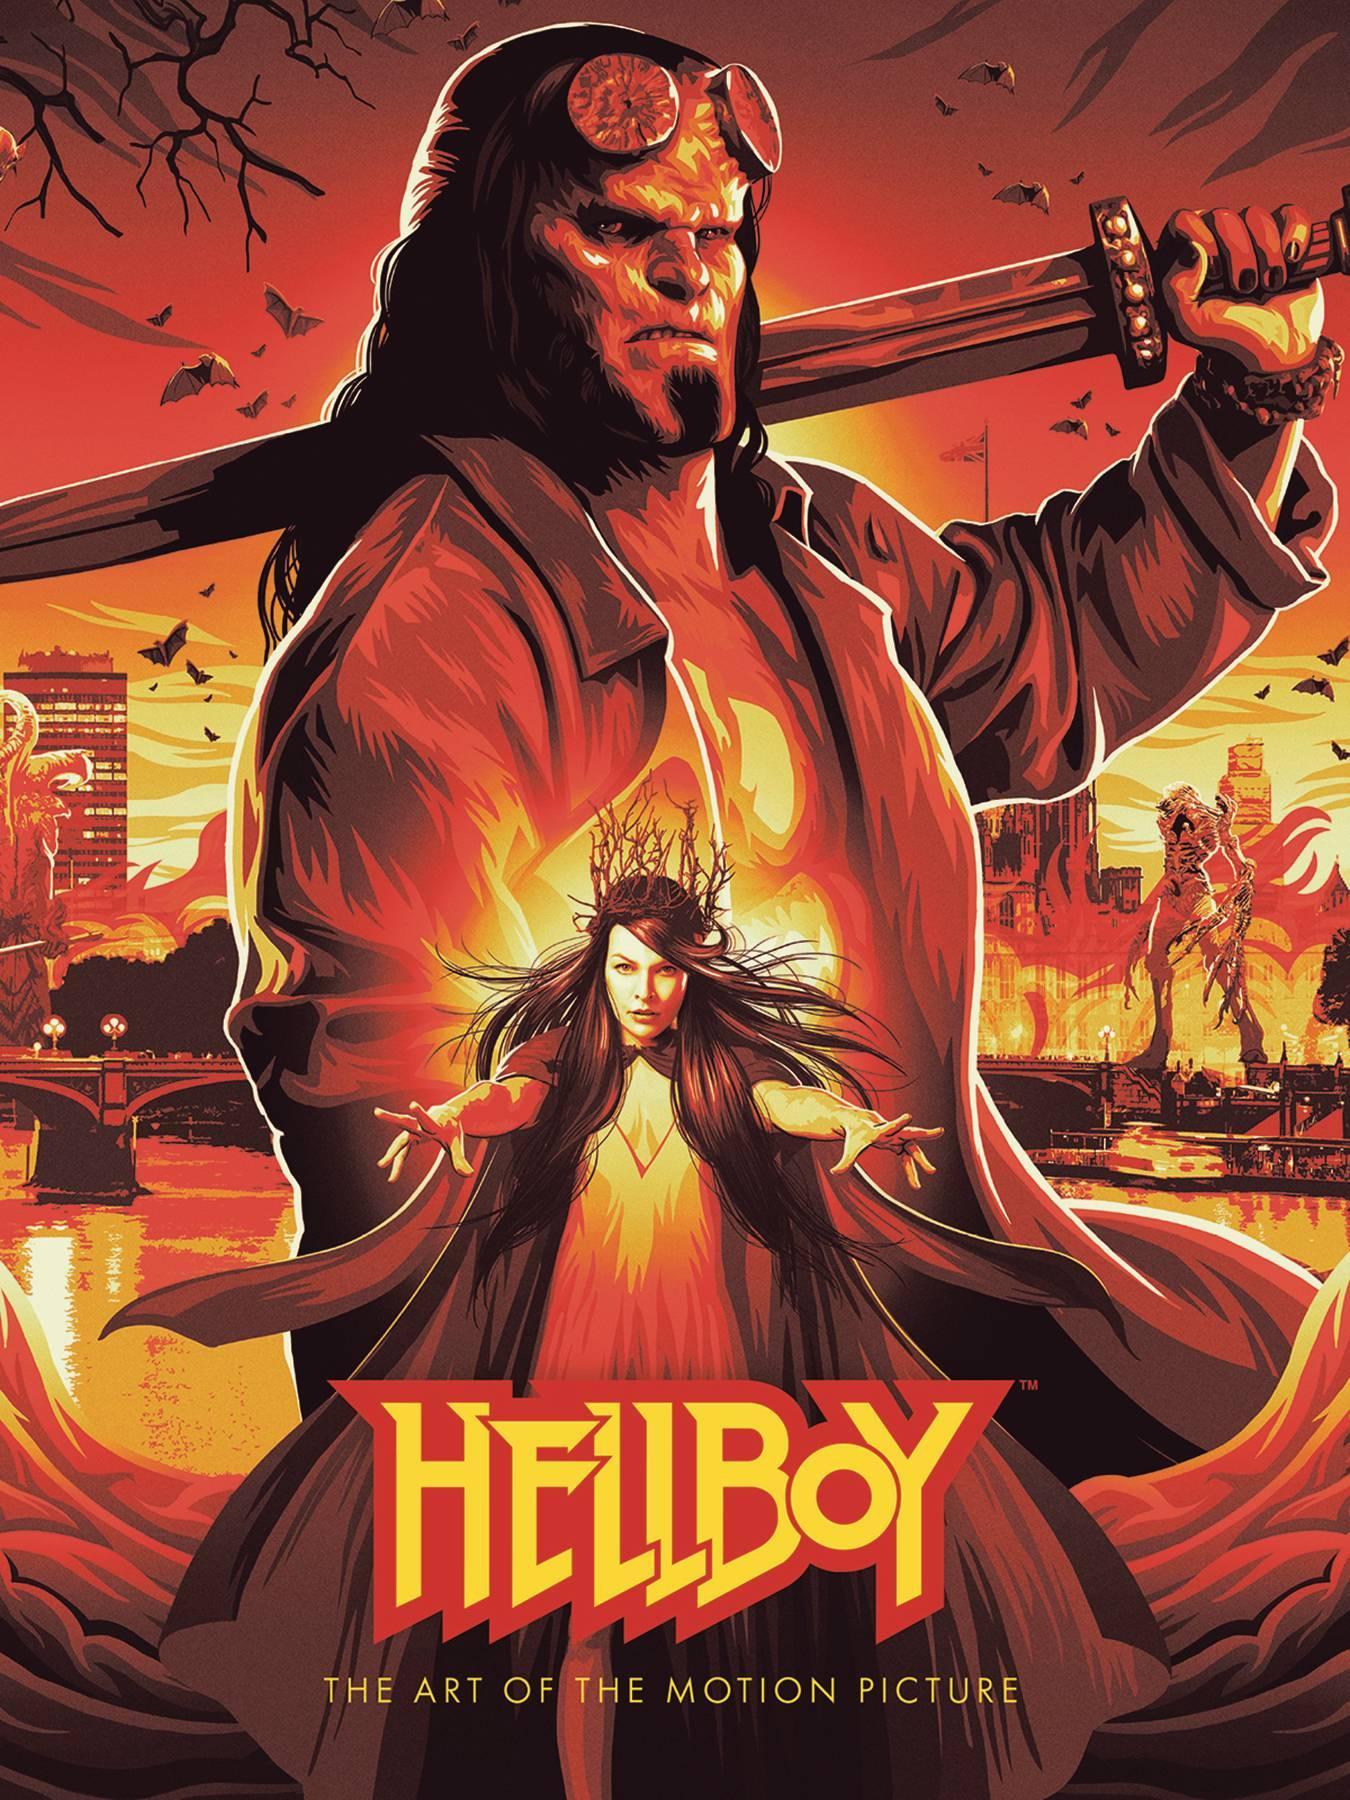 HELLBOY HC ART OF MOTION PICTURE - Kings Comics